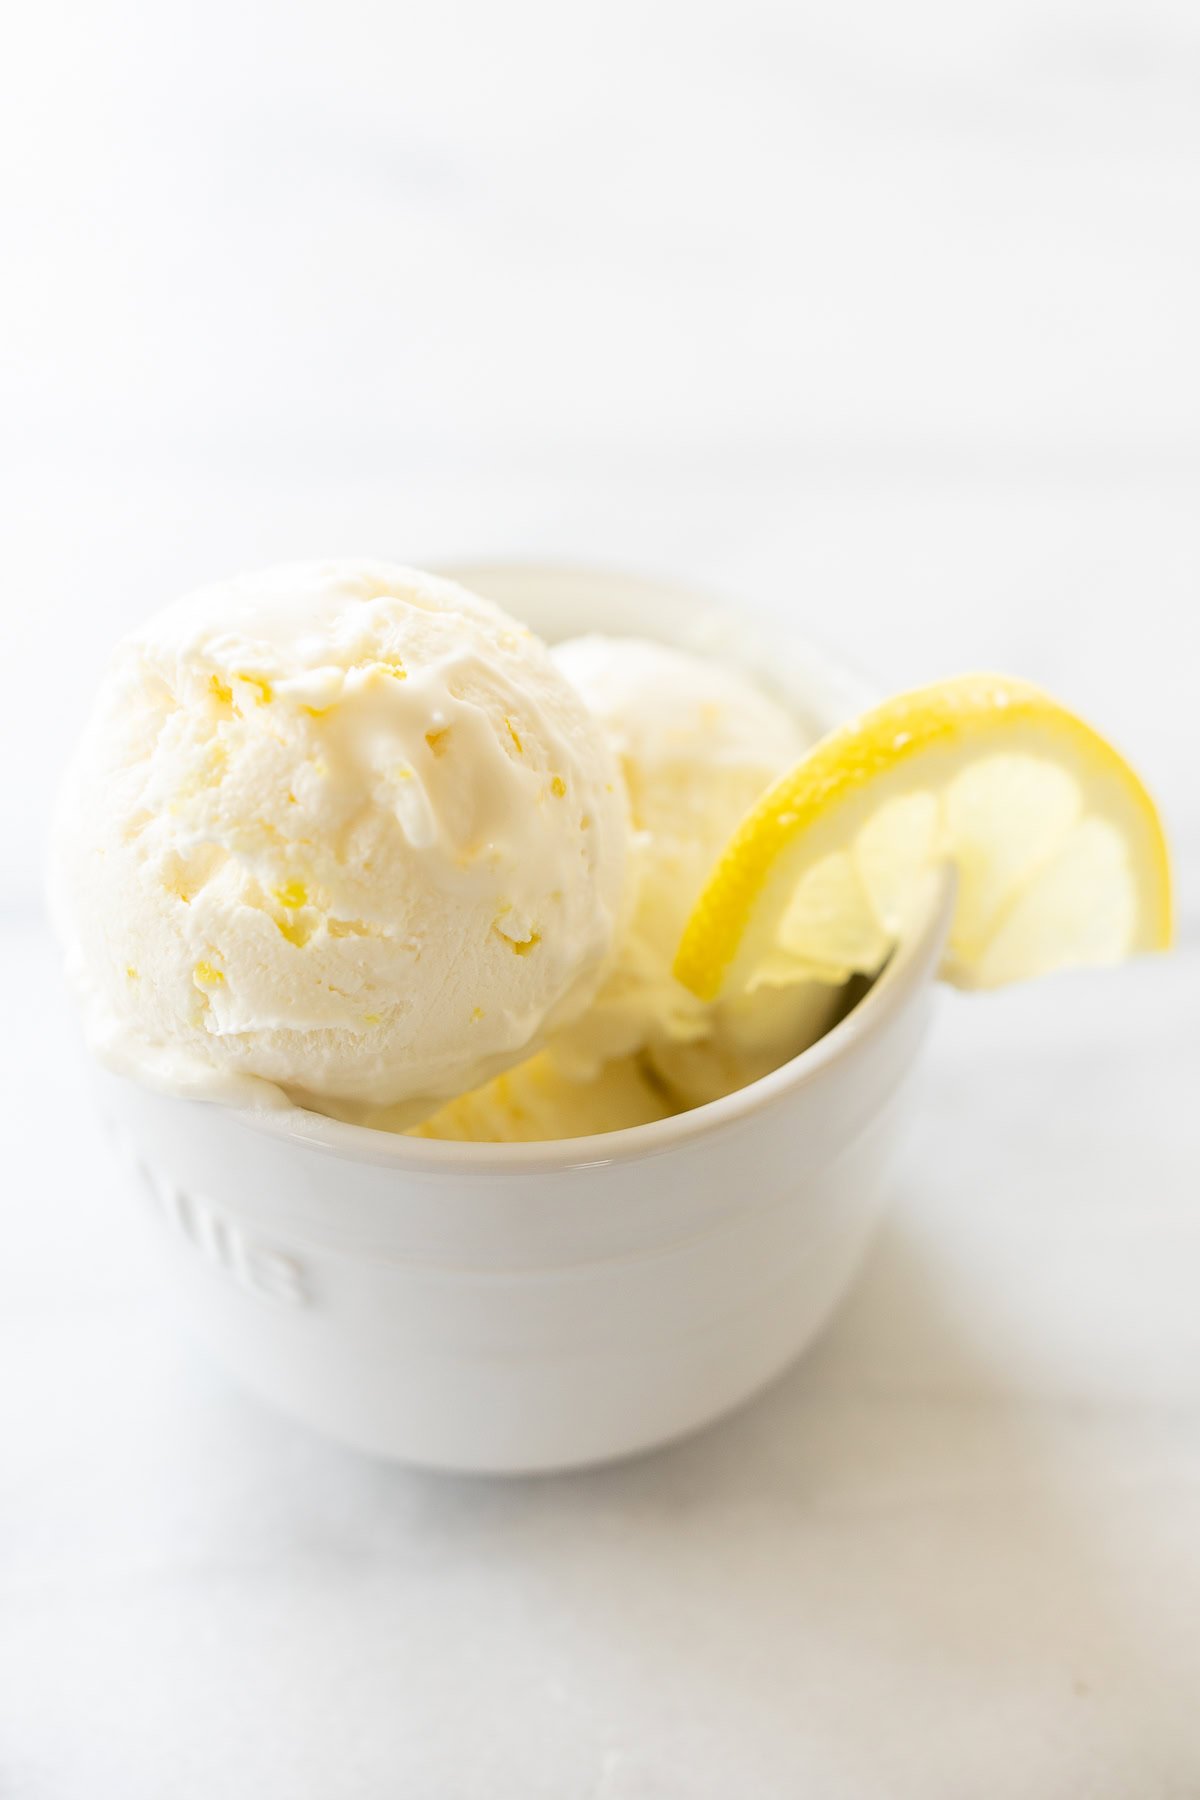 A white ceramic bowl holds two scoops of lemon ice cream, a perfect example of delightful lemon desserts, garnished with a slice of lemon on the edge.